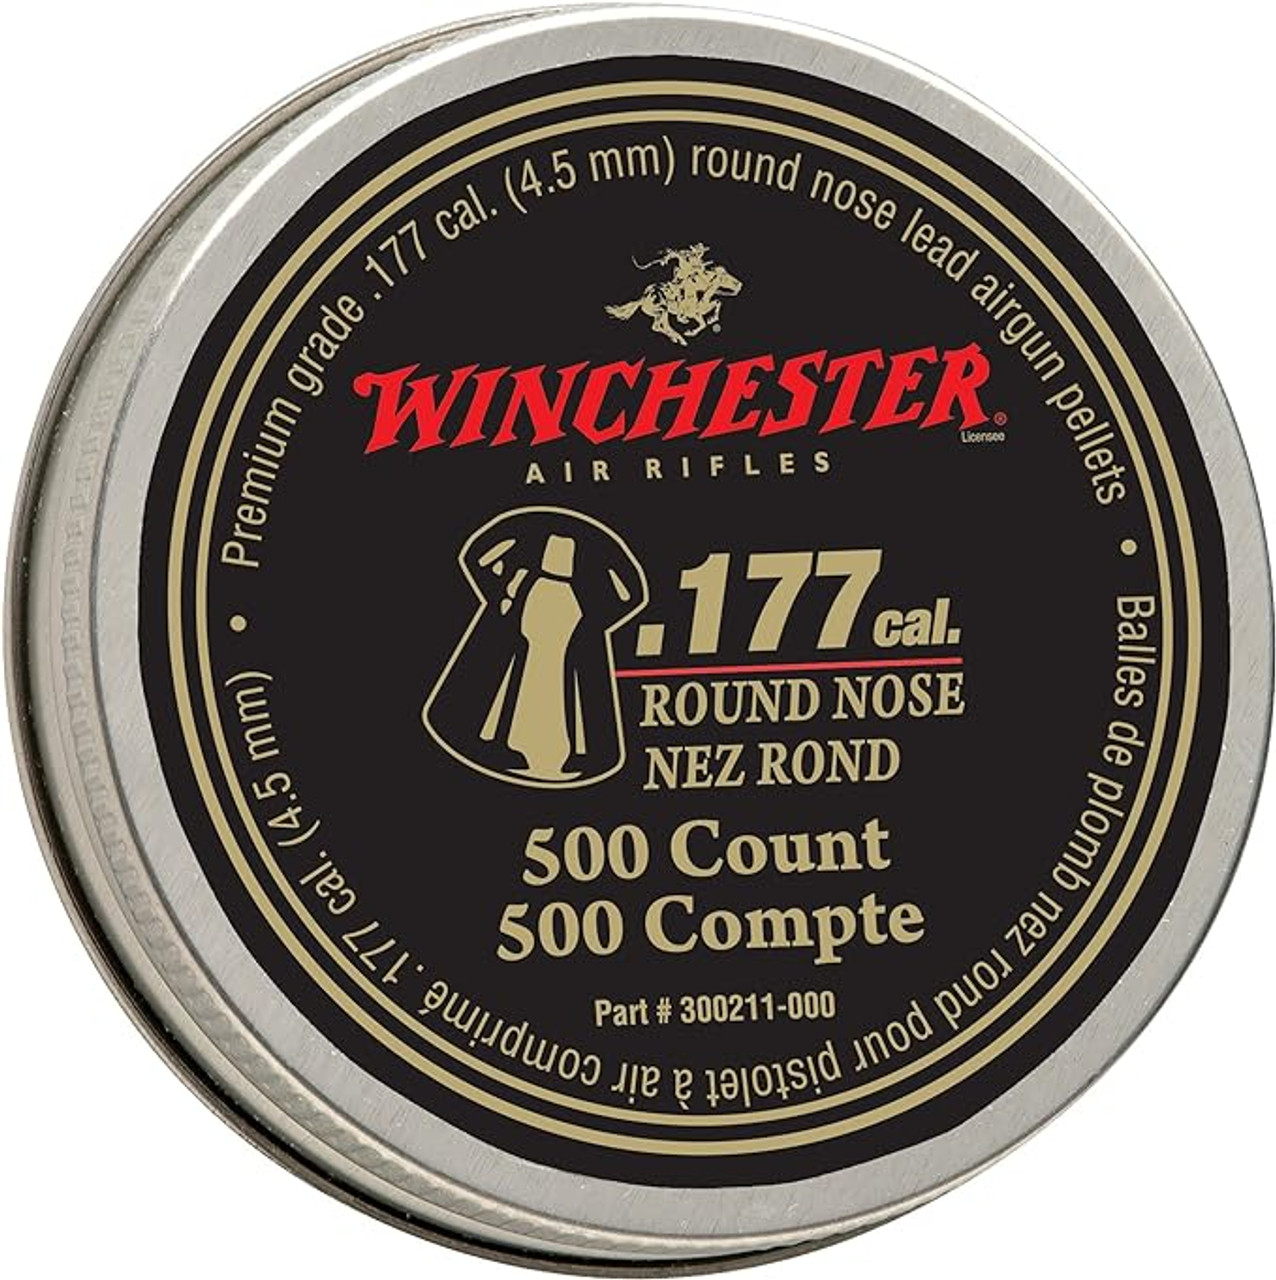 Daisy Winchester Round Nose 0.177 Caliber Pellets, 500 Pack